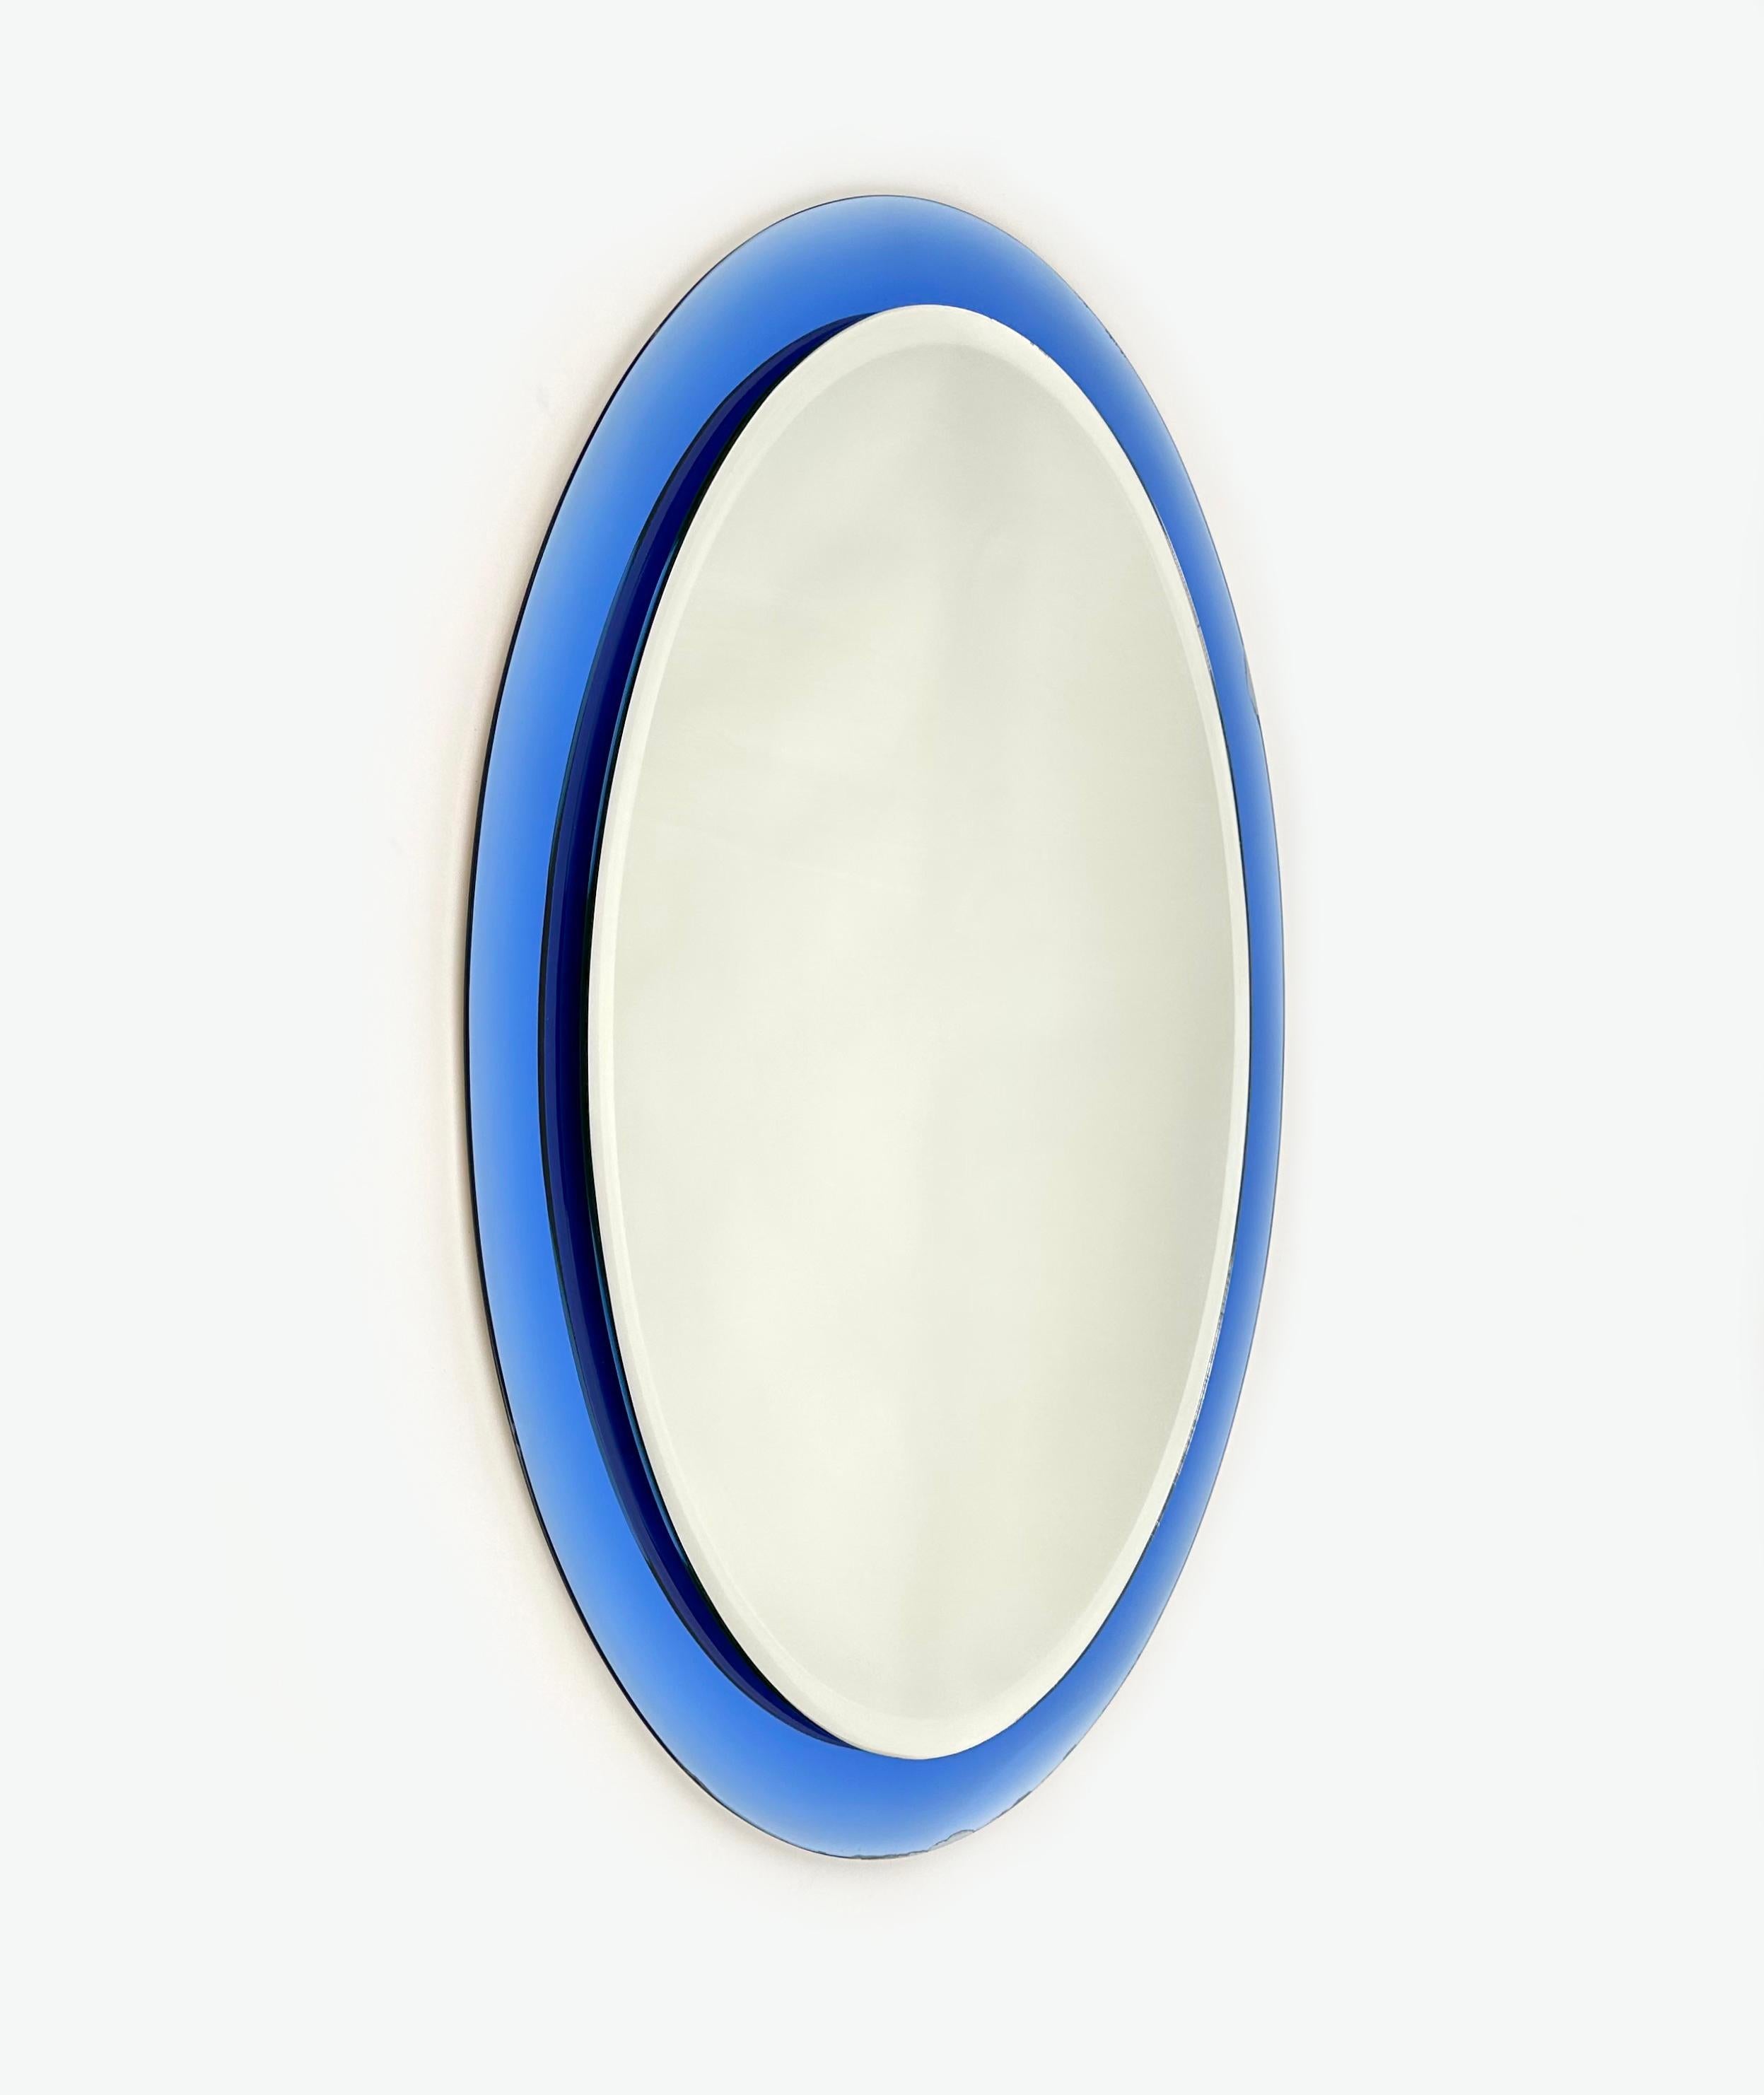 Midcentury Oval wall mirror with blue mirror frame and double decreasing beveled by Metalvetro Galvorame.

Made in Italy in the 1960s.

It comes with its original label signed 